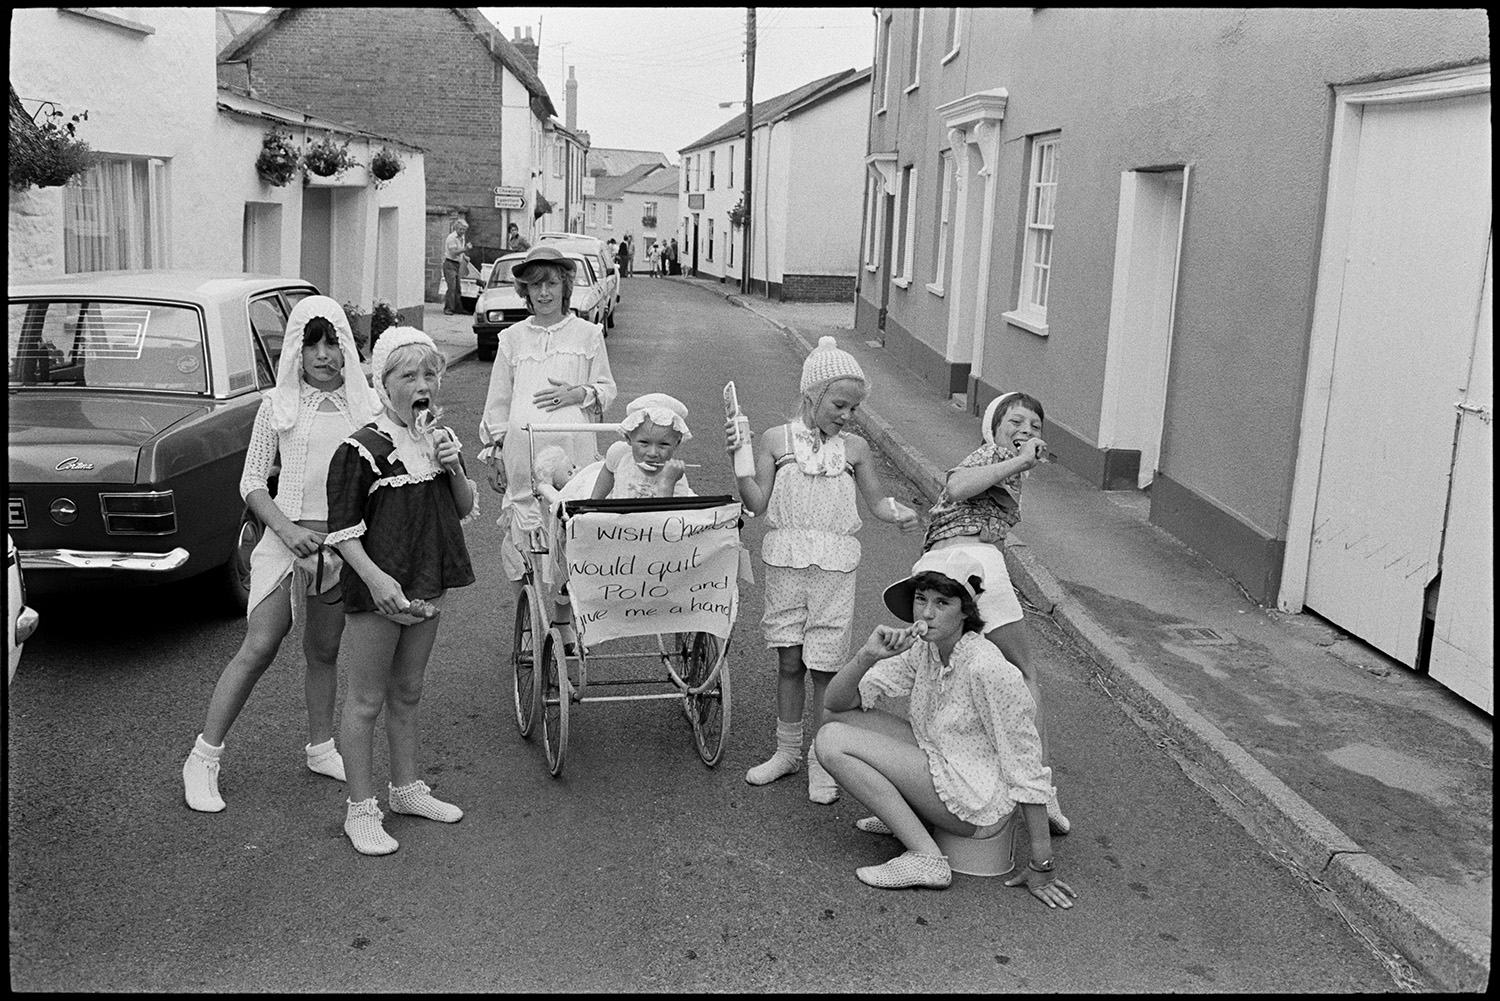 Fancy dress parade with brass band, going home afterwards. 
[Children in fancy dress as Diana Princess of Wales and Prince William, with a pram, at Chulmleigh Fair. The sign on the pram reads 'I wish Charles would quit Polo and give me a hand'. One child is sat in the pram and some of them are eating ice creams.]